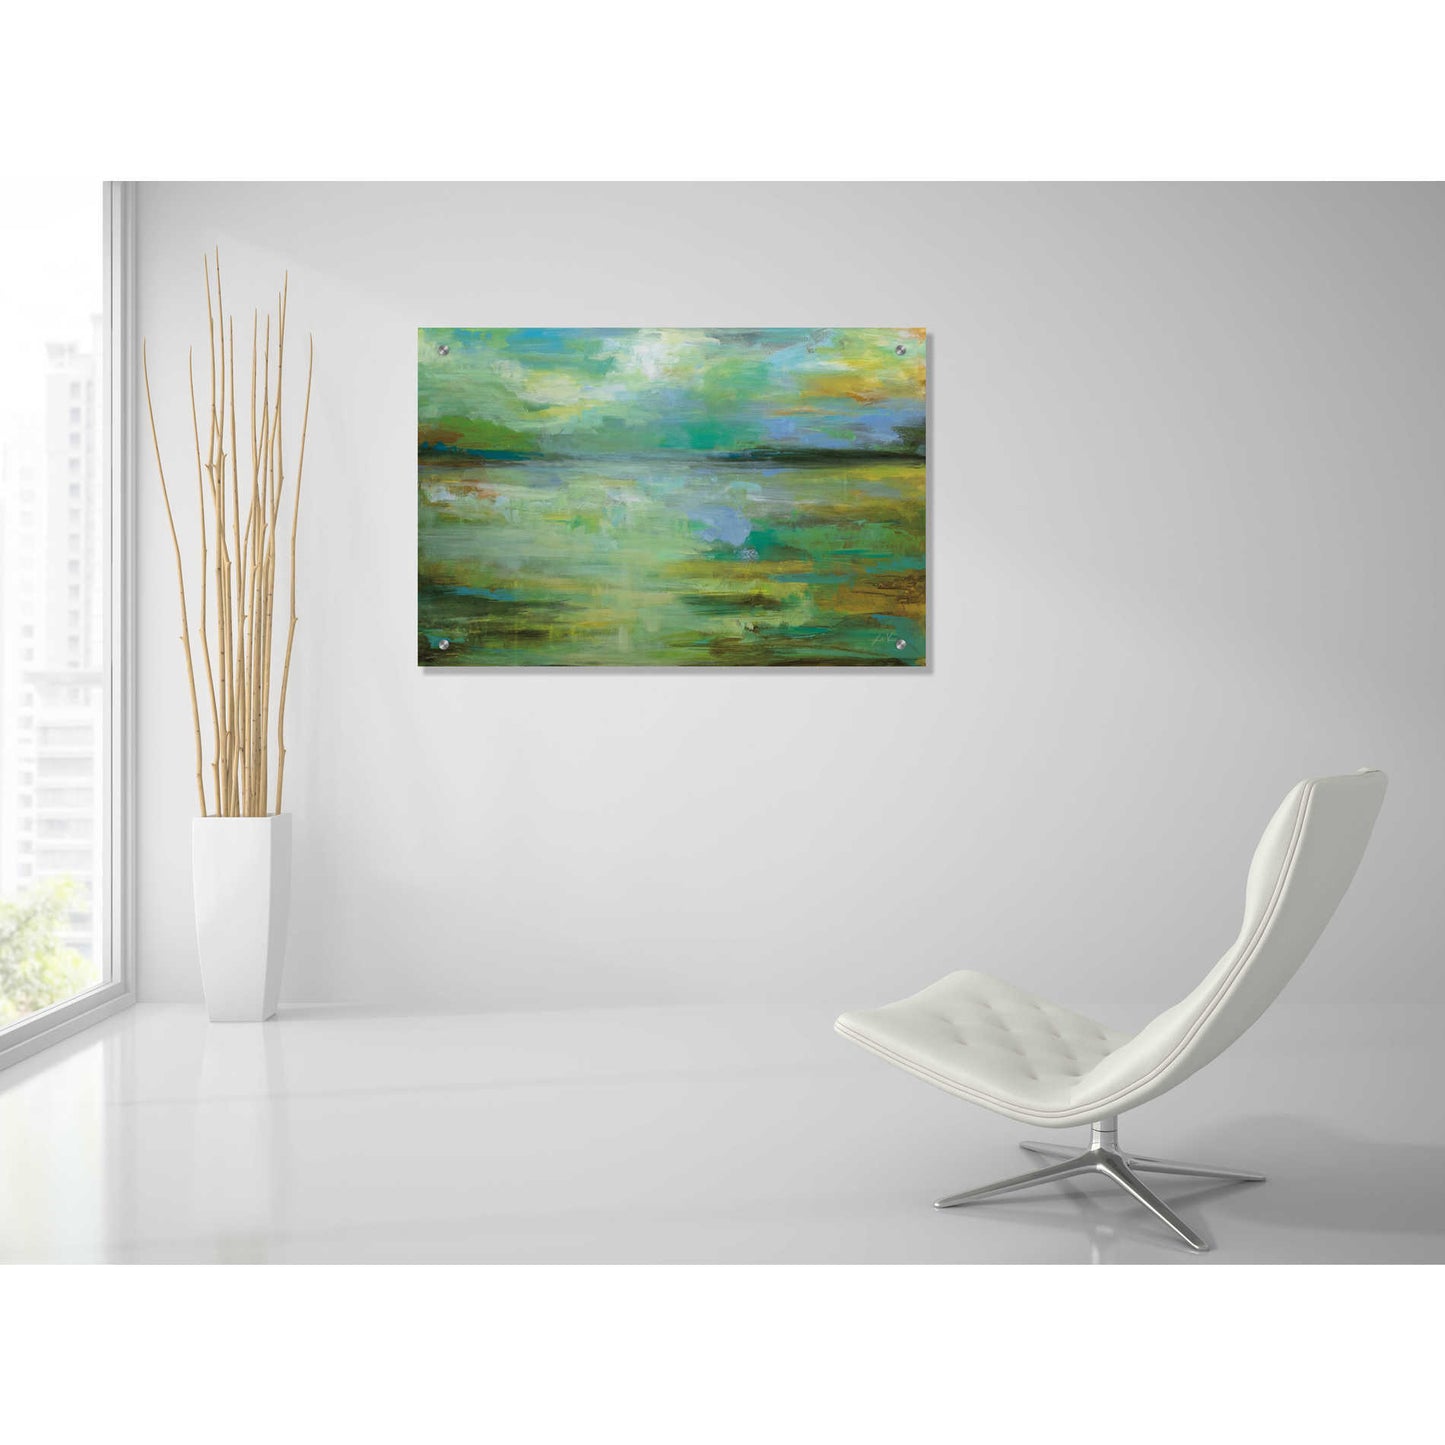 Epic Art 'Calm' by Jeanette Vertentes, Acrylic Glass Wall Art,36x24